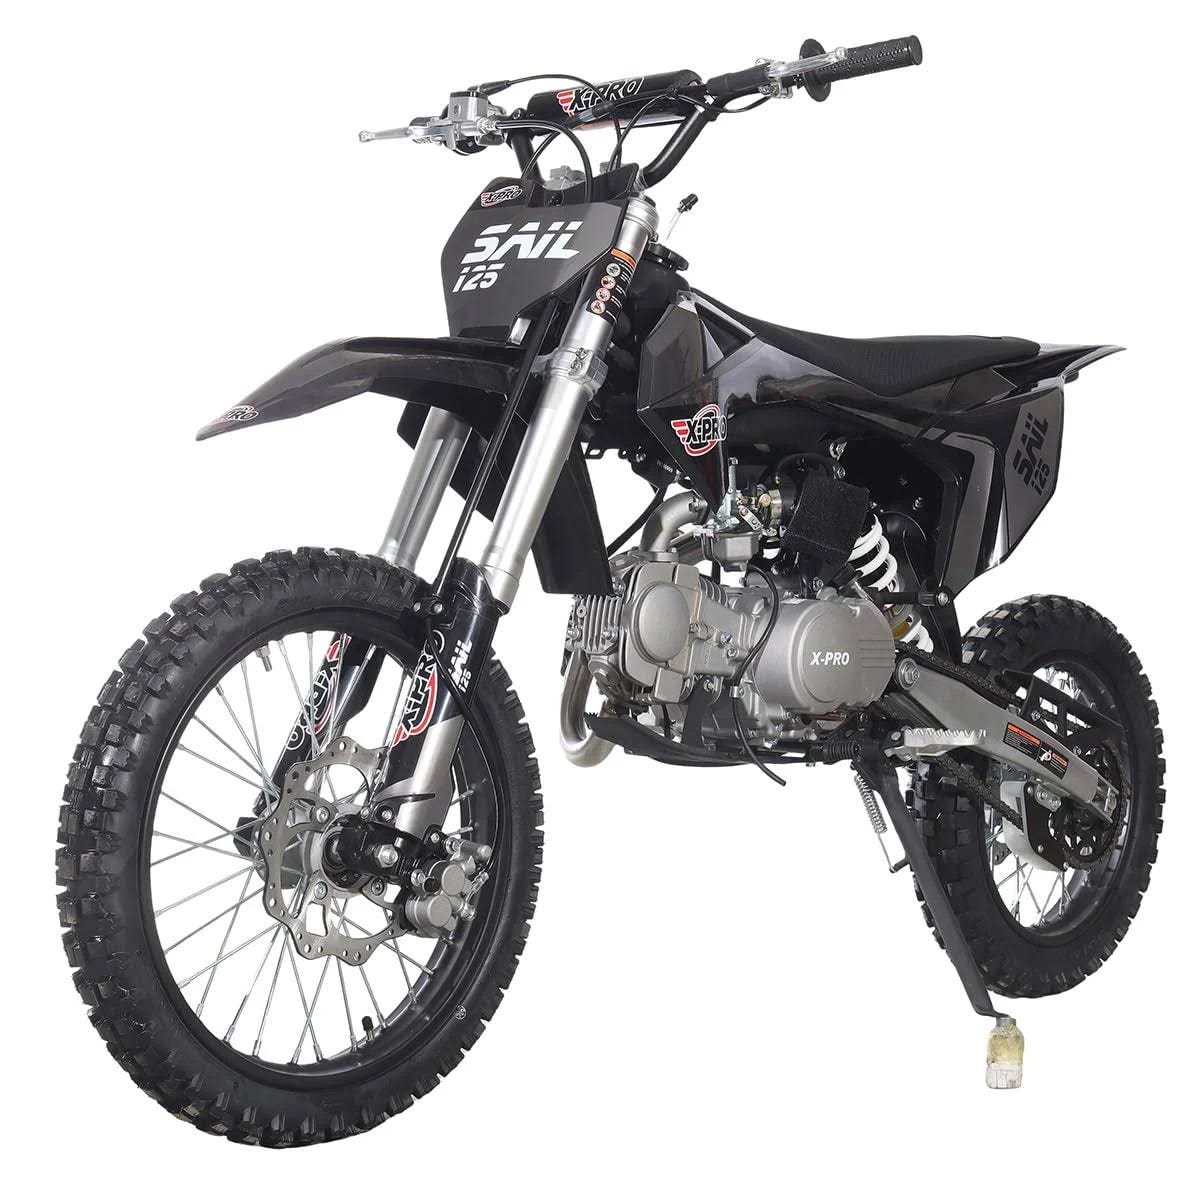 X-Pro Sail 125cc Dirt Bike with Air-Cooled Engine for Off-Road Adventures | Image